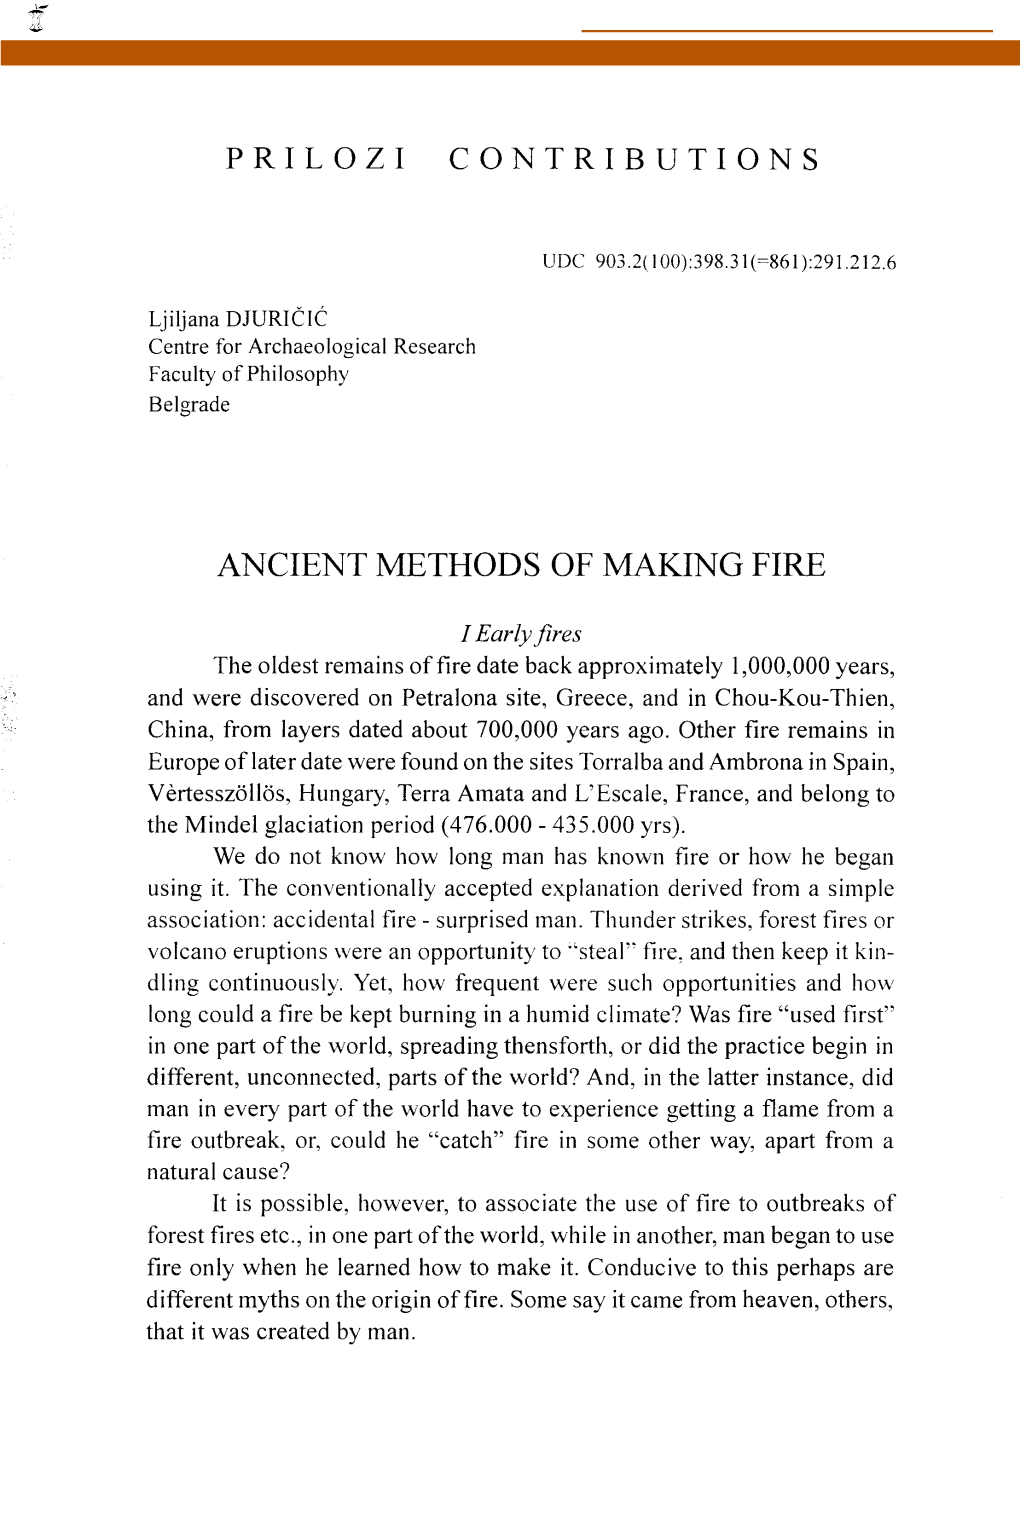 Ancient Methods of Making Fire